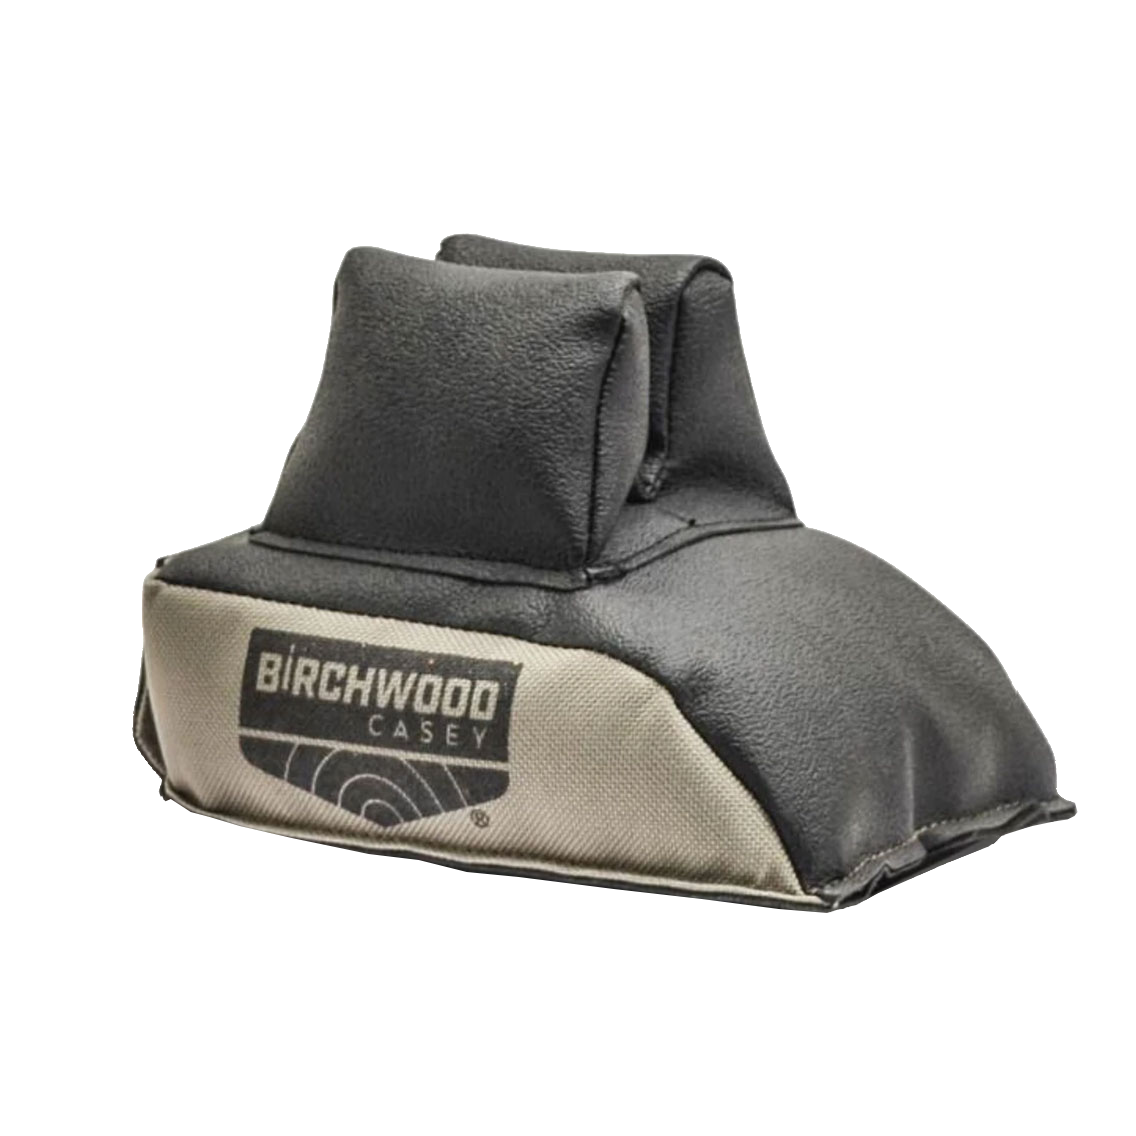 Birchwood Casey Universal Shooting Front Rest Rear Bag - Filled #bc-Urbf